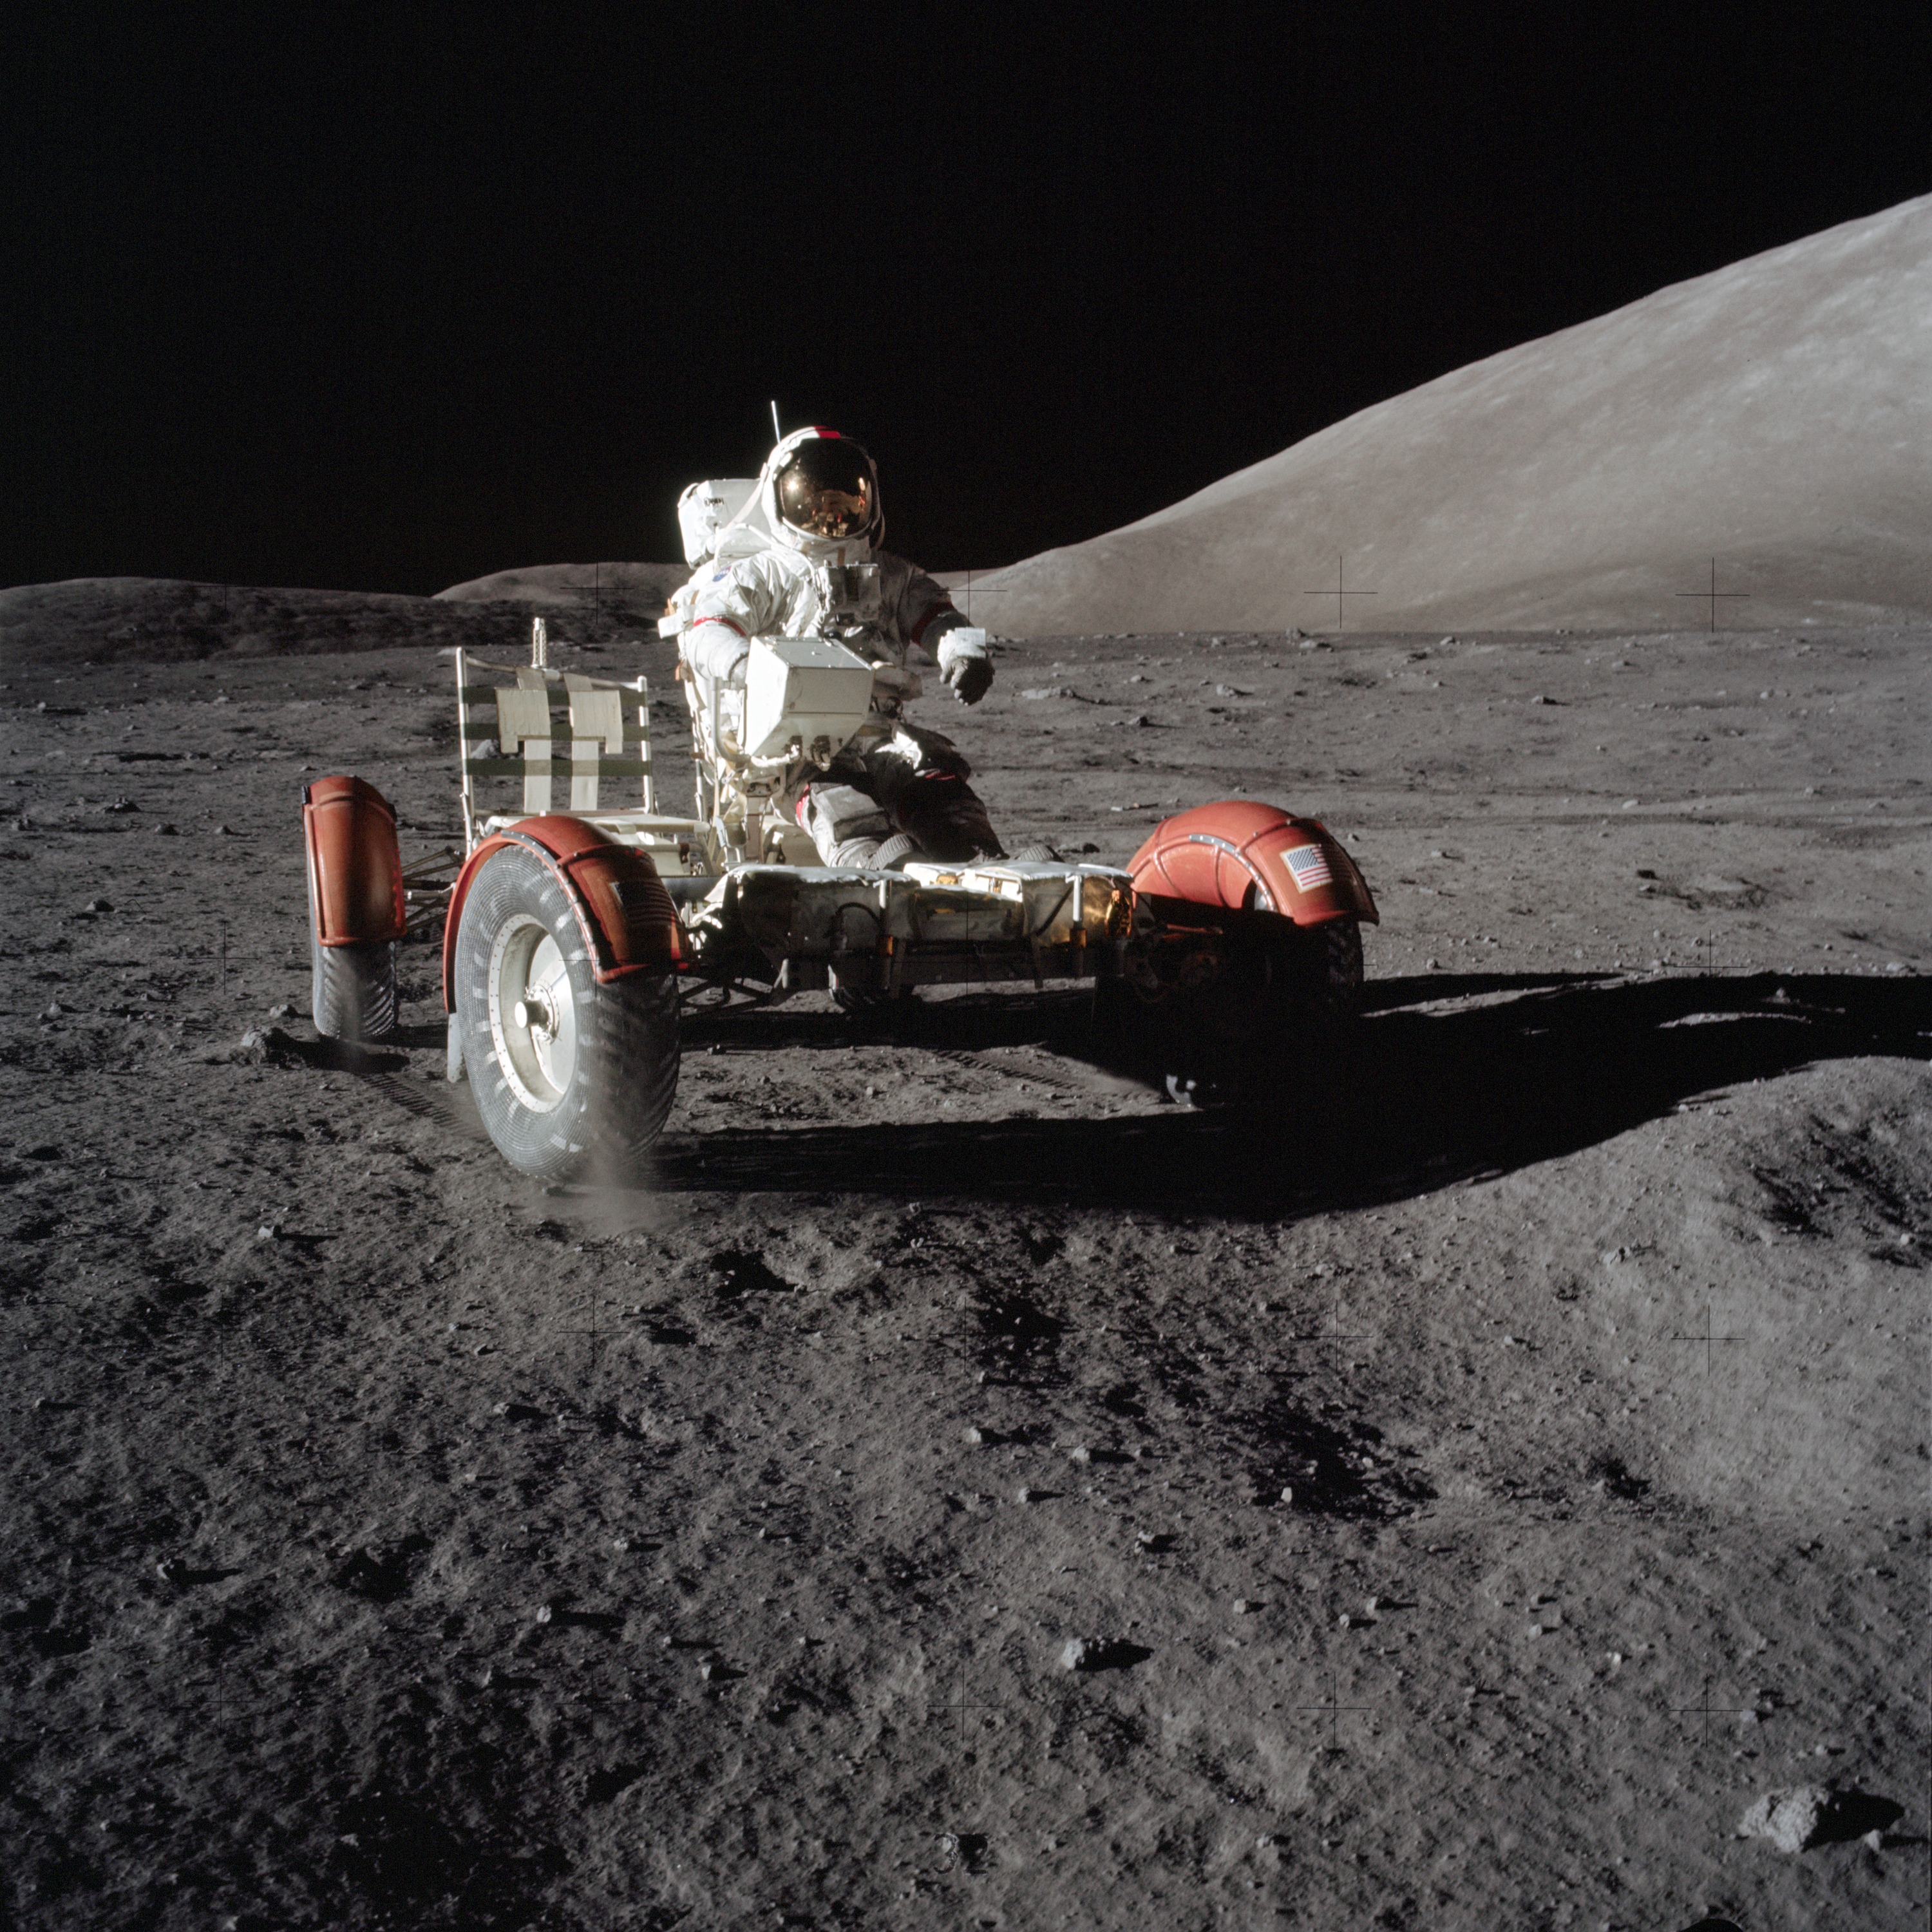 On the Moon's grey, dusty surface, an astronaut stands near a rover. A hill rises in the background under a black sky.